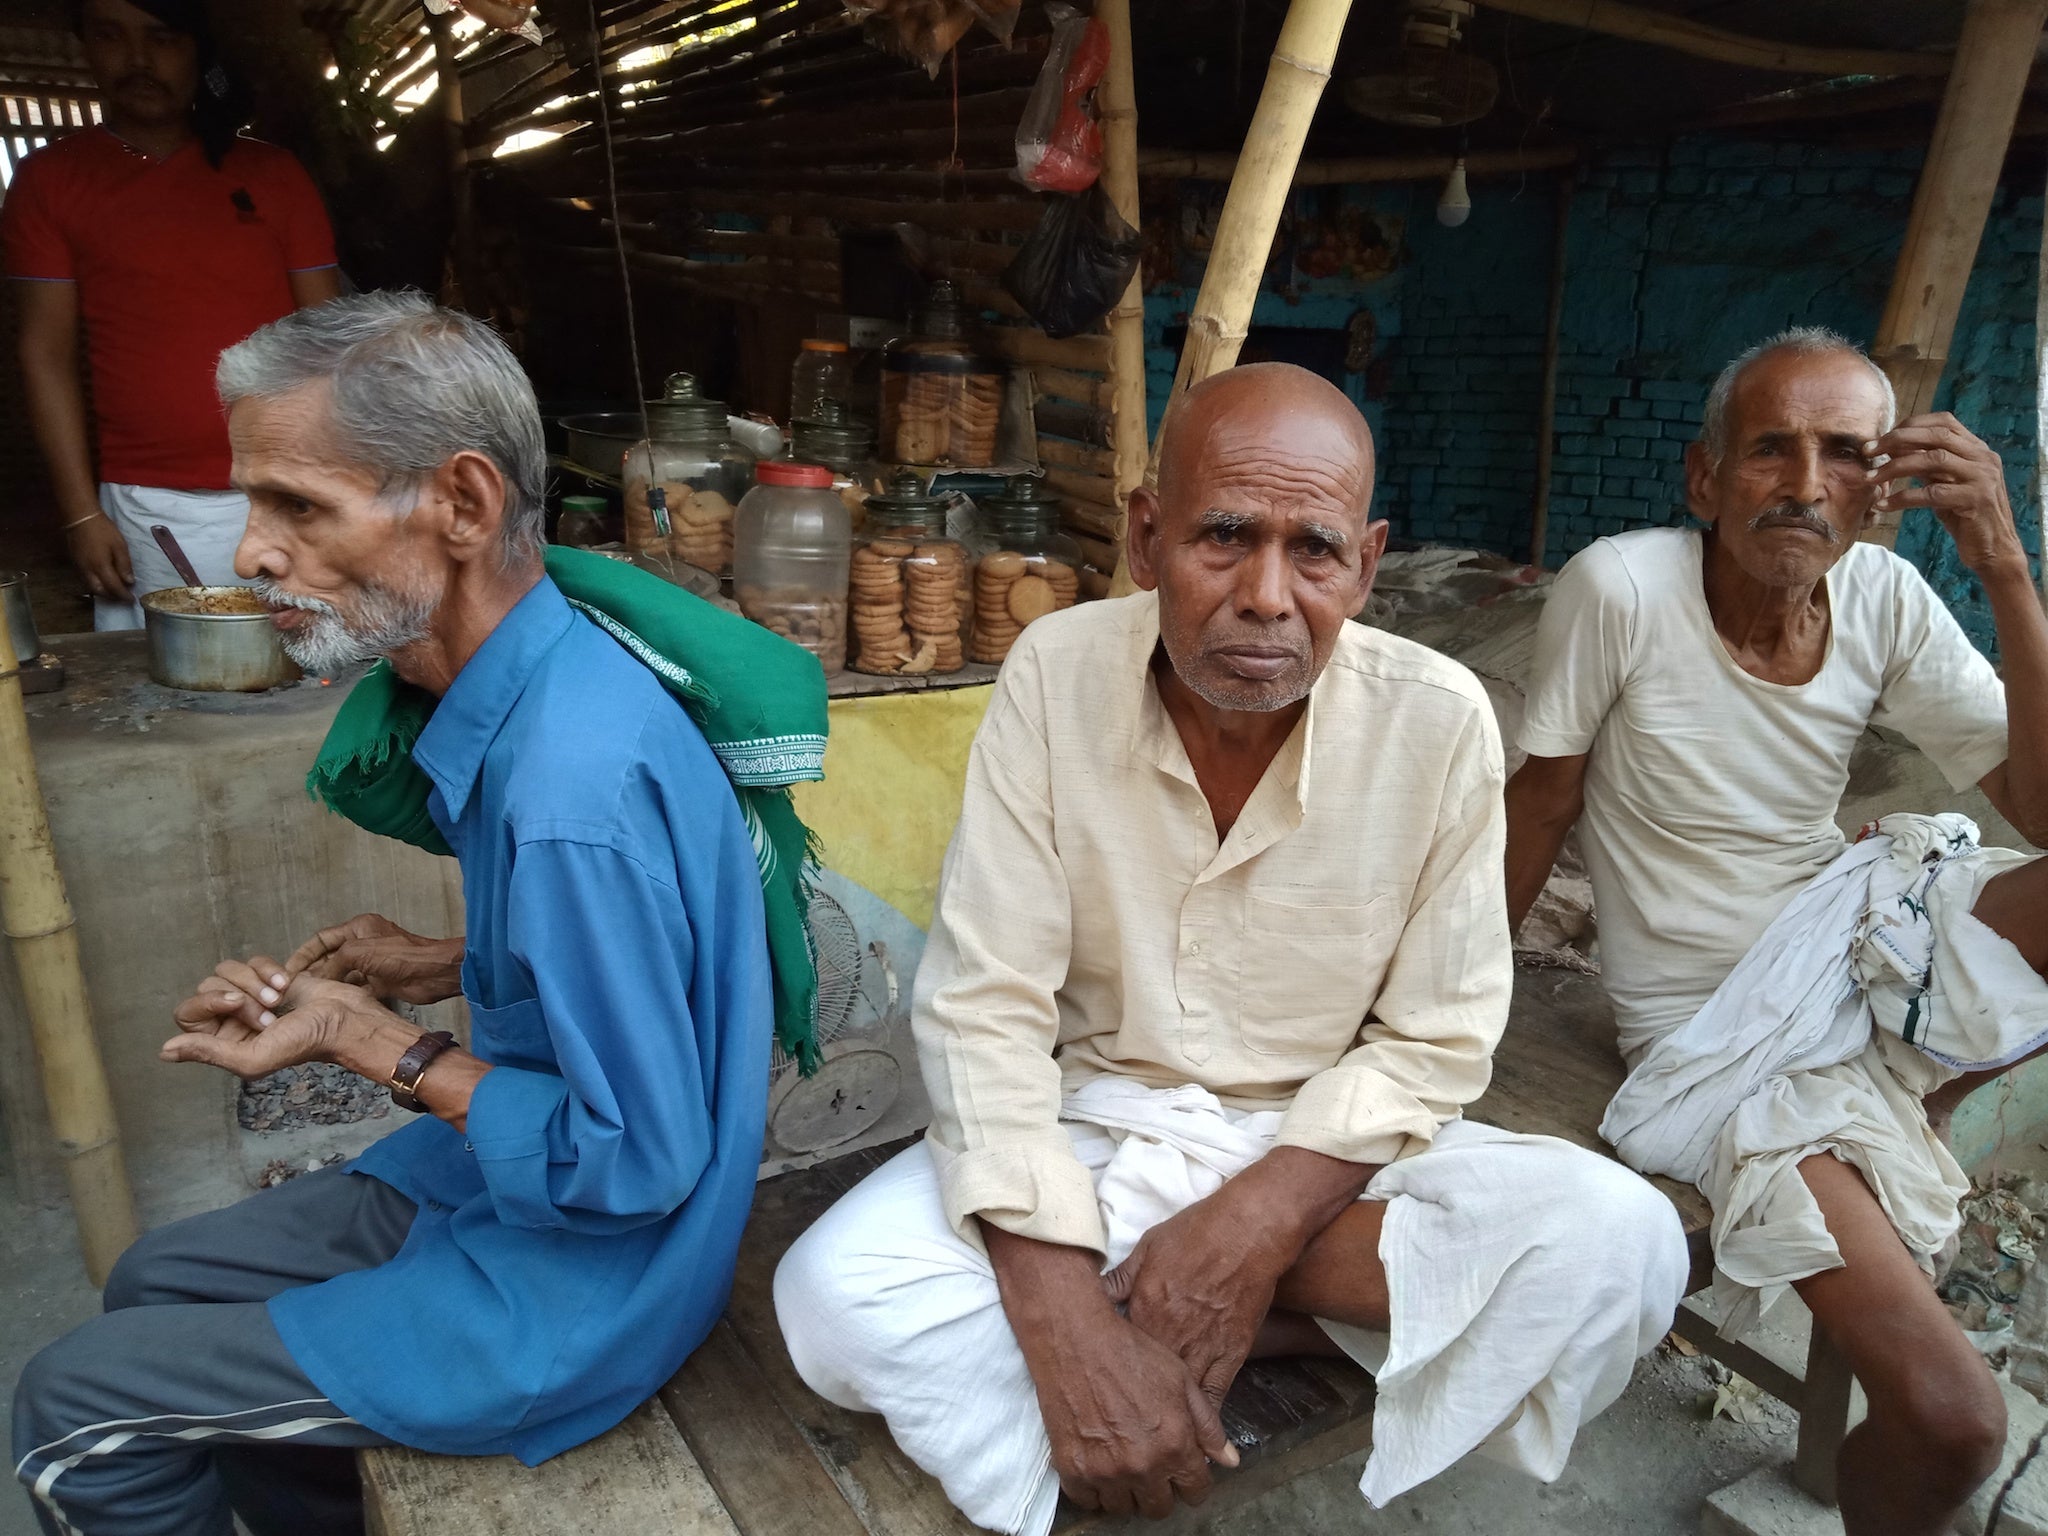 ‘Narendra Modi is killing us’: Farmers at a tea stand in rural Bihar say BJP policies have squeezed their livelihoods